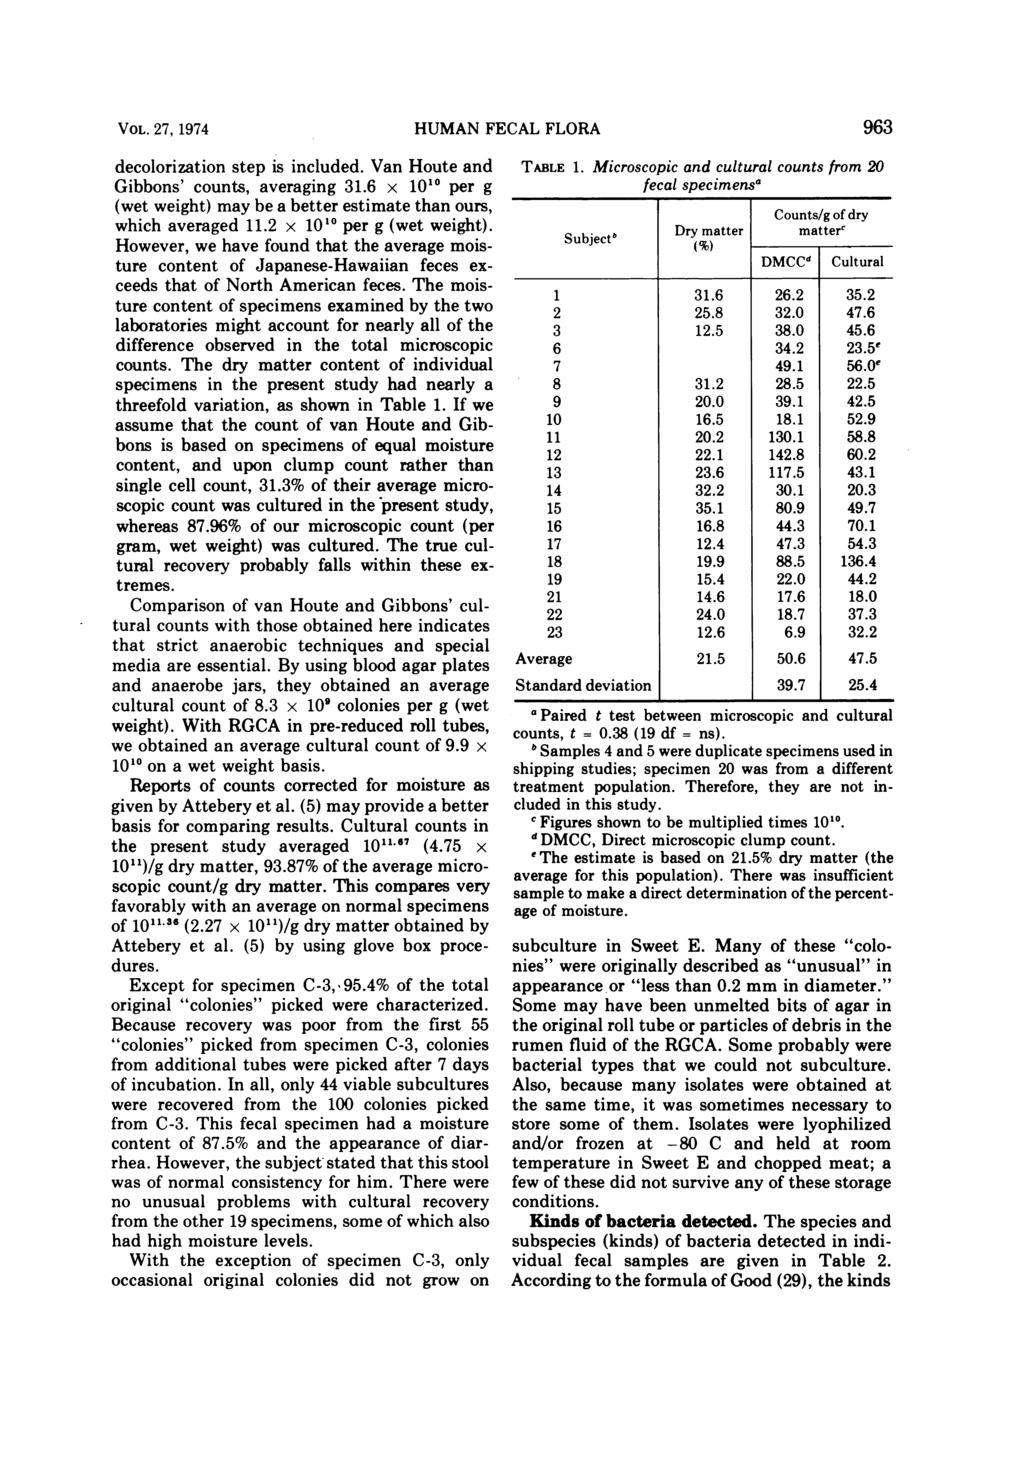 VOL. 27, 1974 decolorization step is included. Van Houte and Gibbons' counts, averaging 31.6 x 11 per g (wet weight) may be a better estimate than ours, which averaged 11.2 x 11 per g (wet weight).